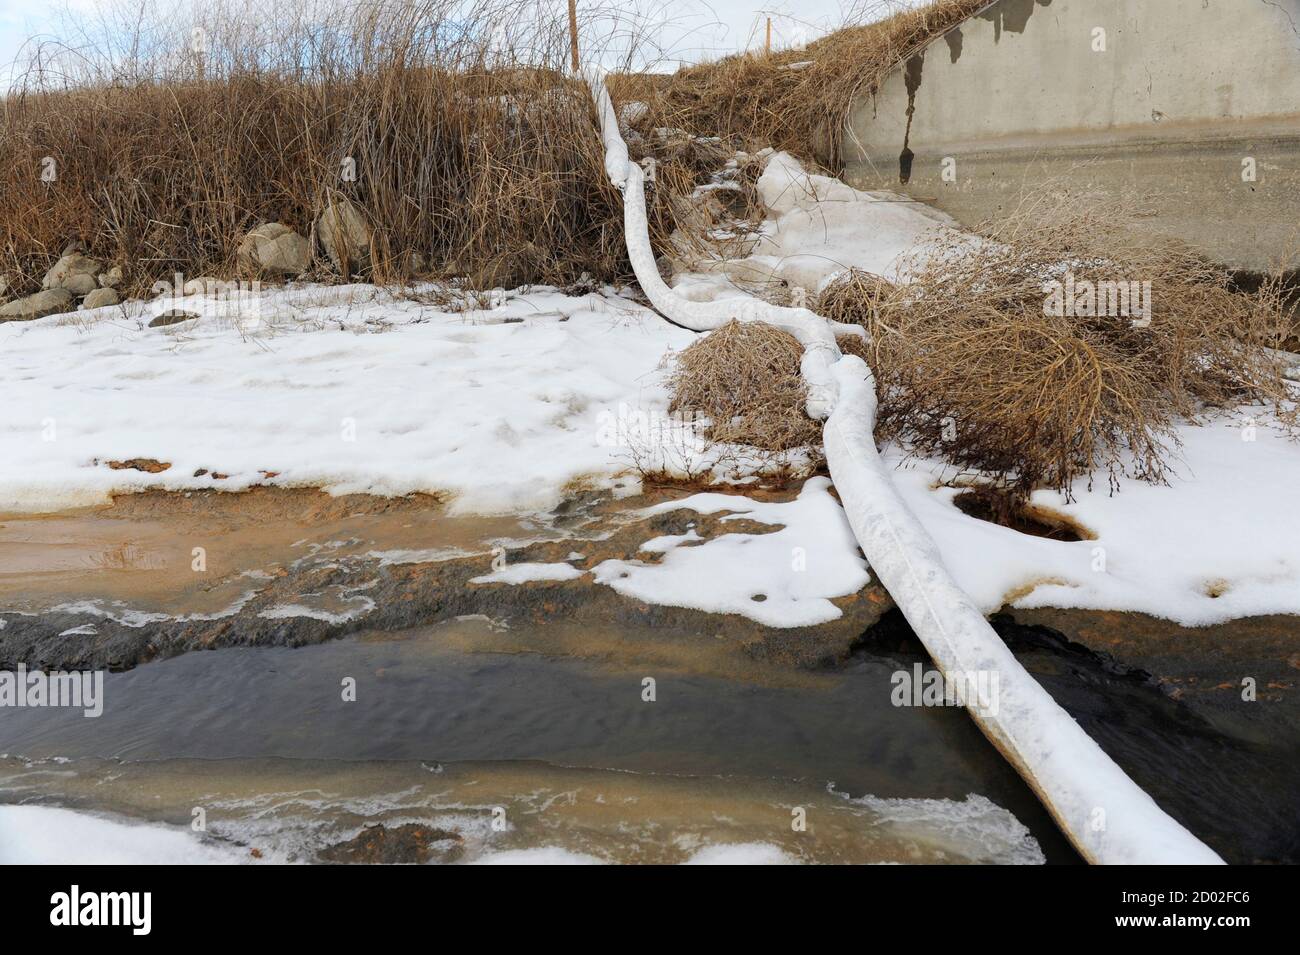 Clean-up efforts continue about 15 miles outside Williston, North Dakota January 22, 2015.  Nearly 3 million gallons of saltwater and an unknown quantity of crude oil have leaked from a North Dakota pipeline into a creek that feeds the Missouri River, by far the largest spill of its kind in the state's history, officials said.  REUTERS/Andrew Cullen   (UNITED STATES - Tags: BUSINESS ENERGY COMMODITIES) Stock Photo